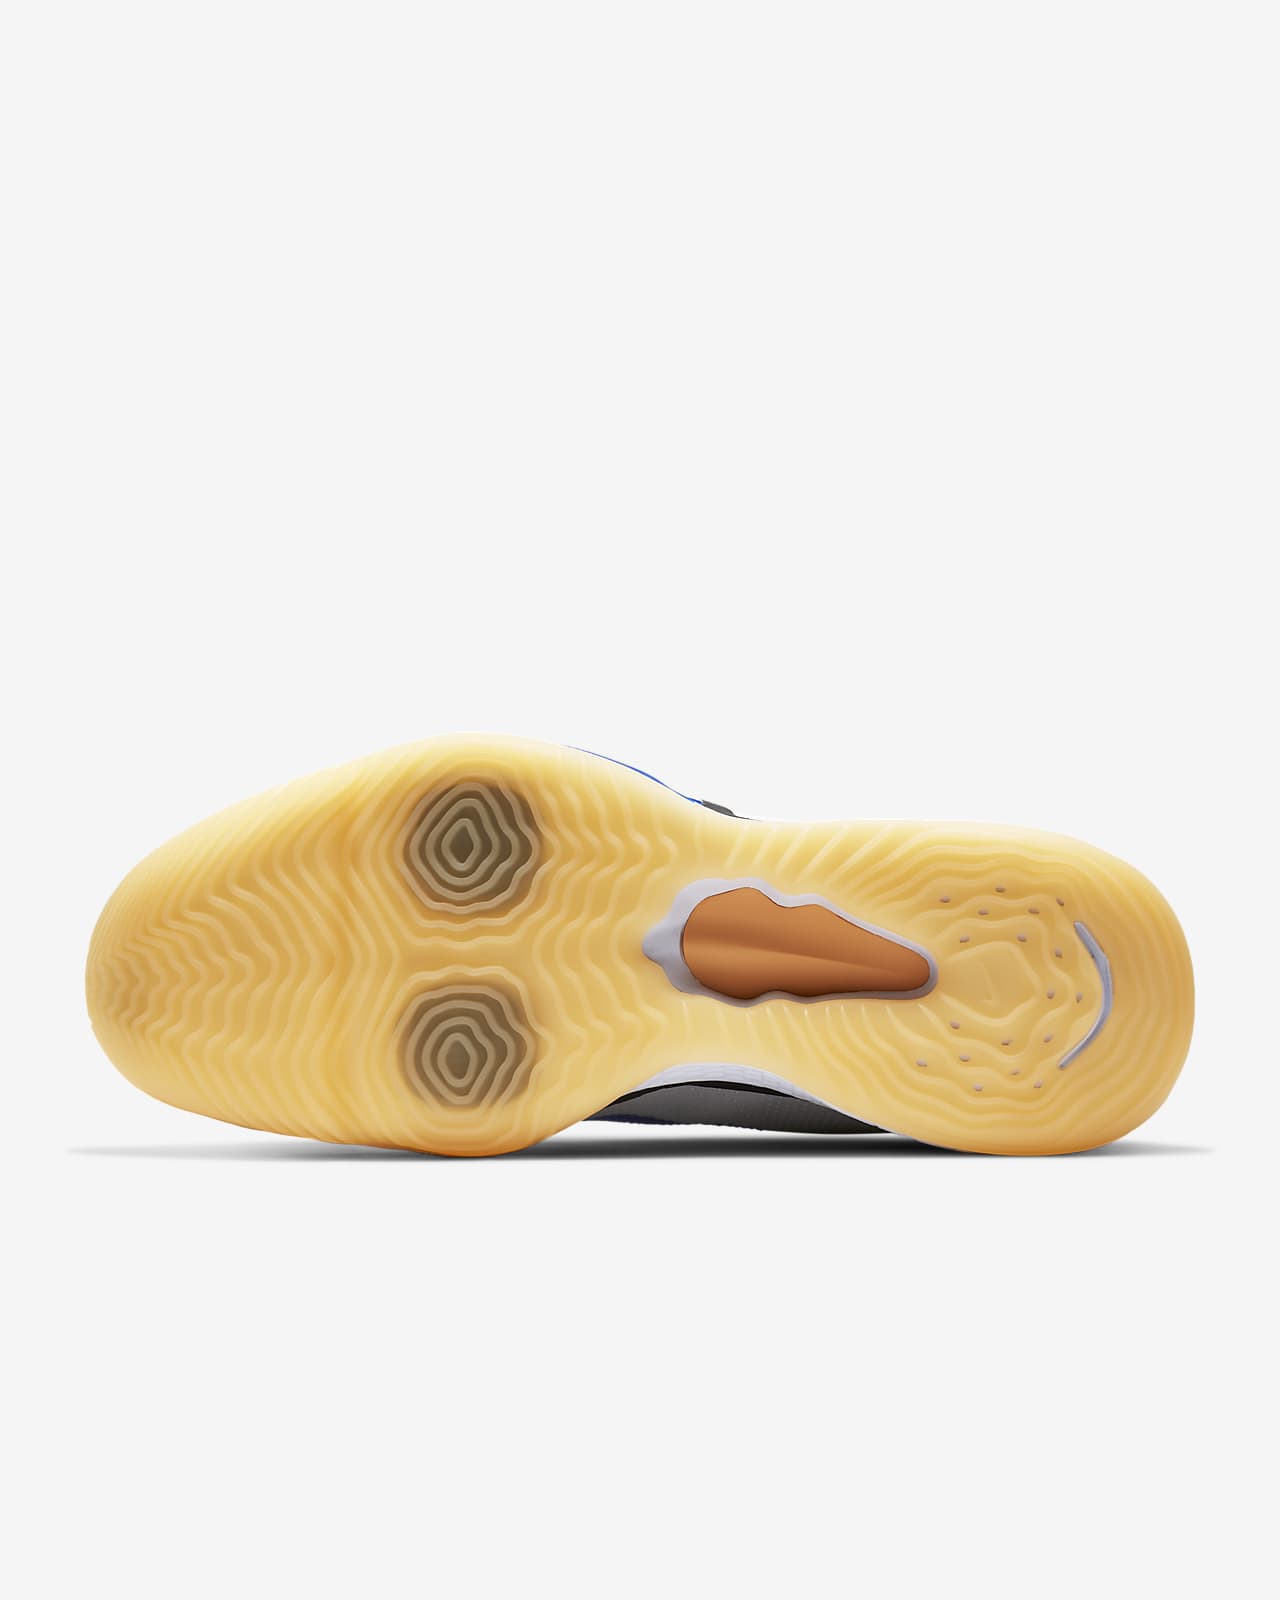 nike shoes that look like bowling shoes